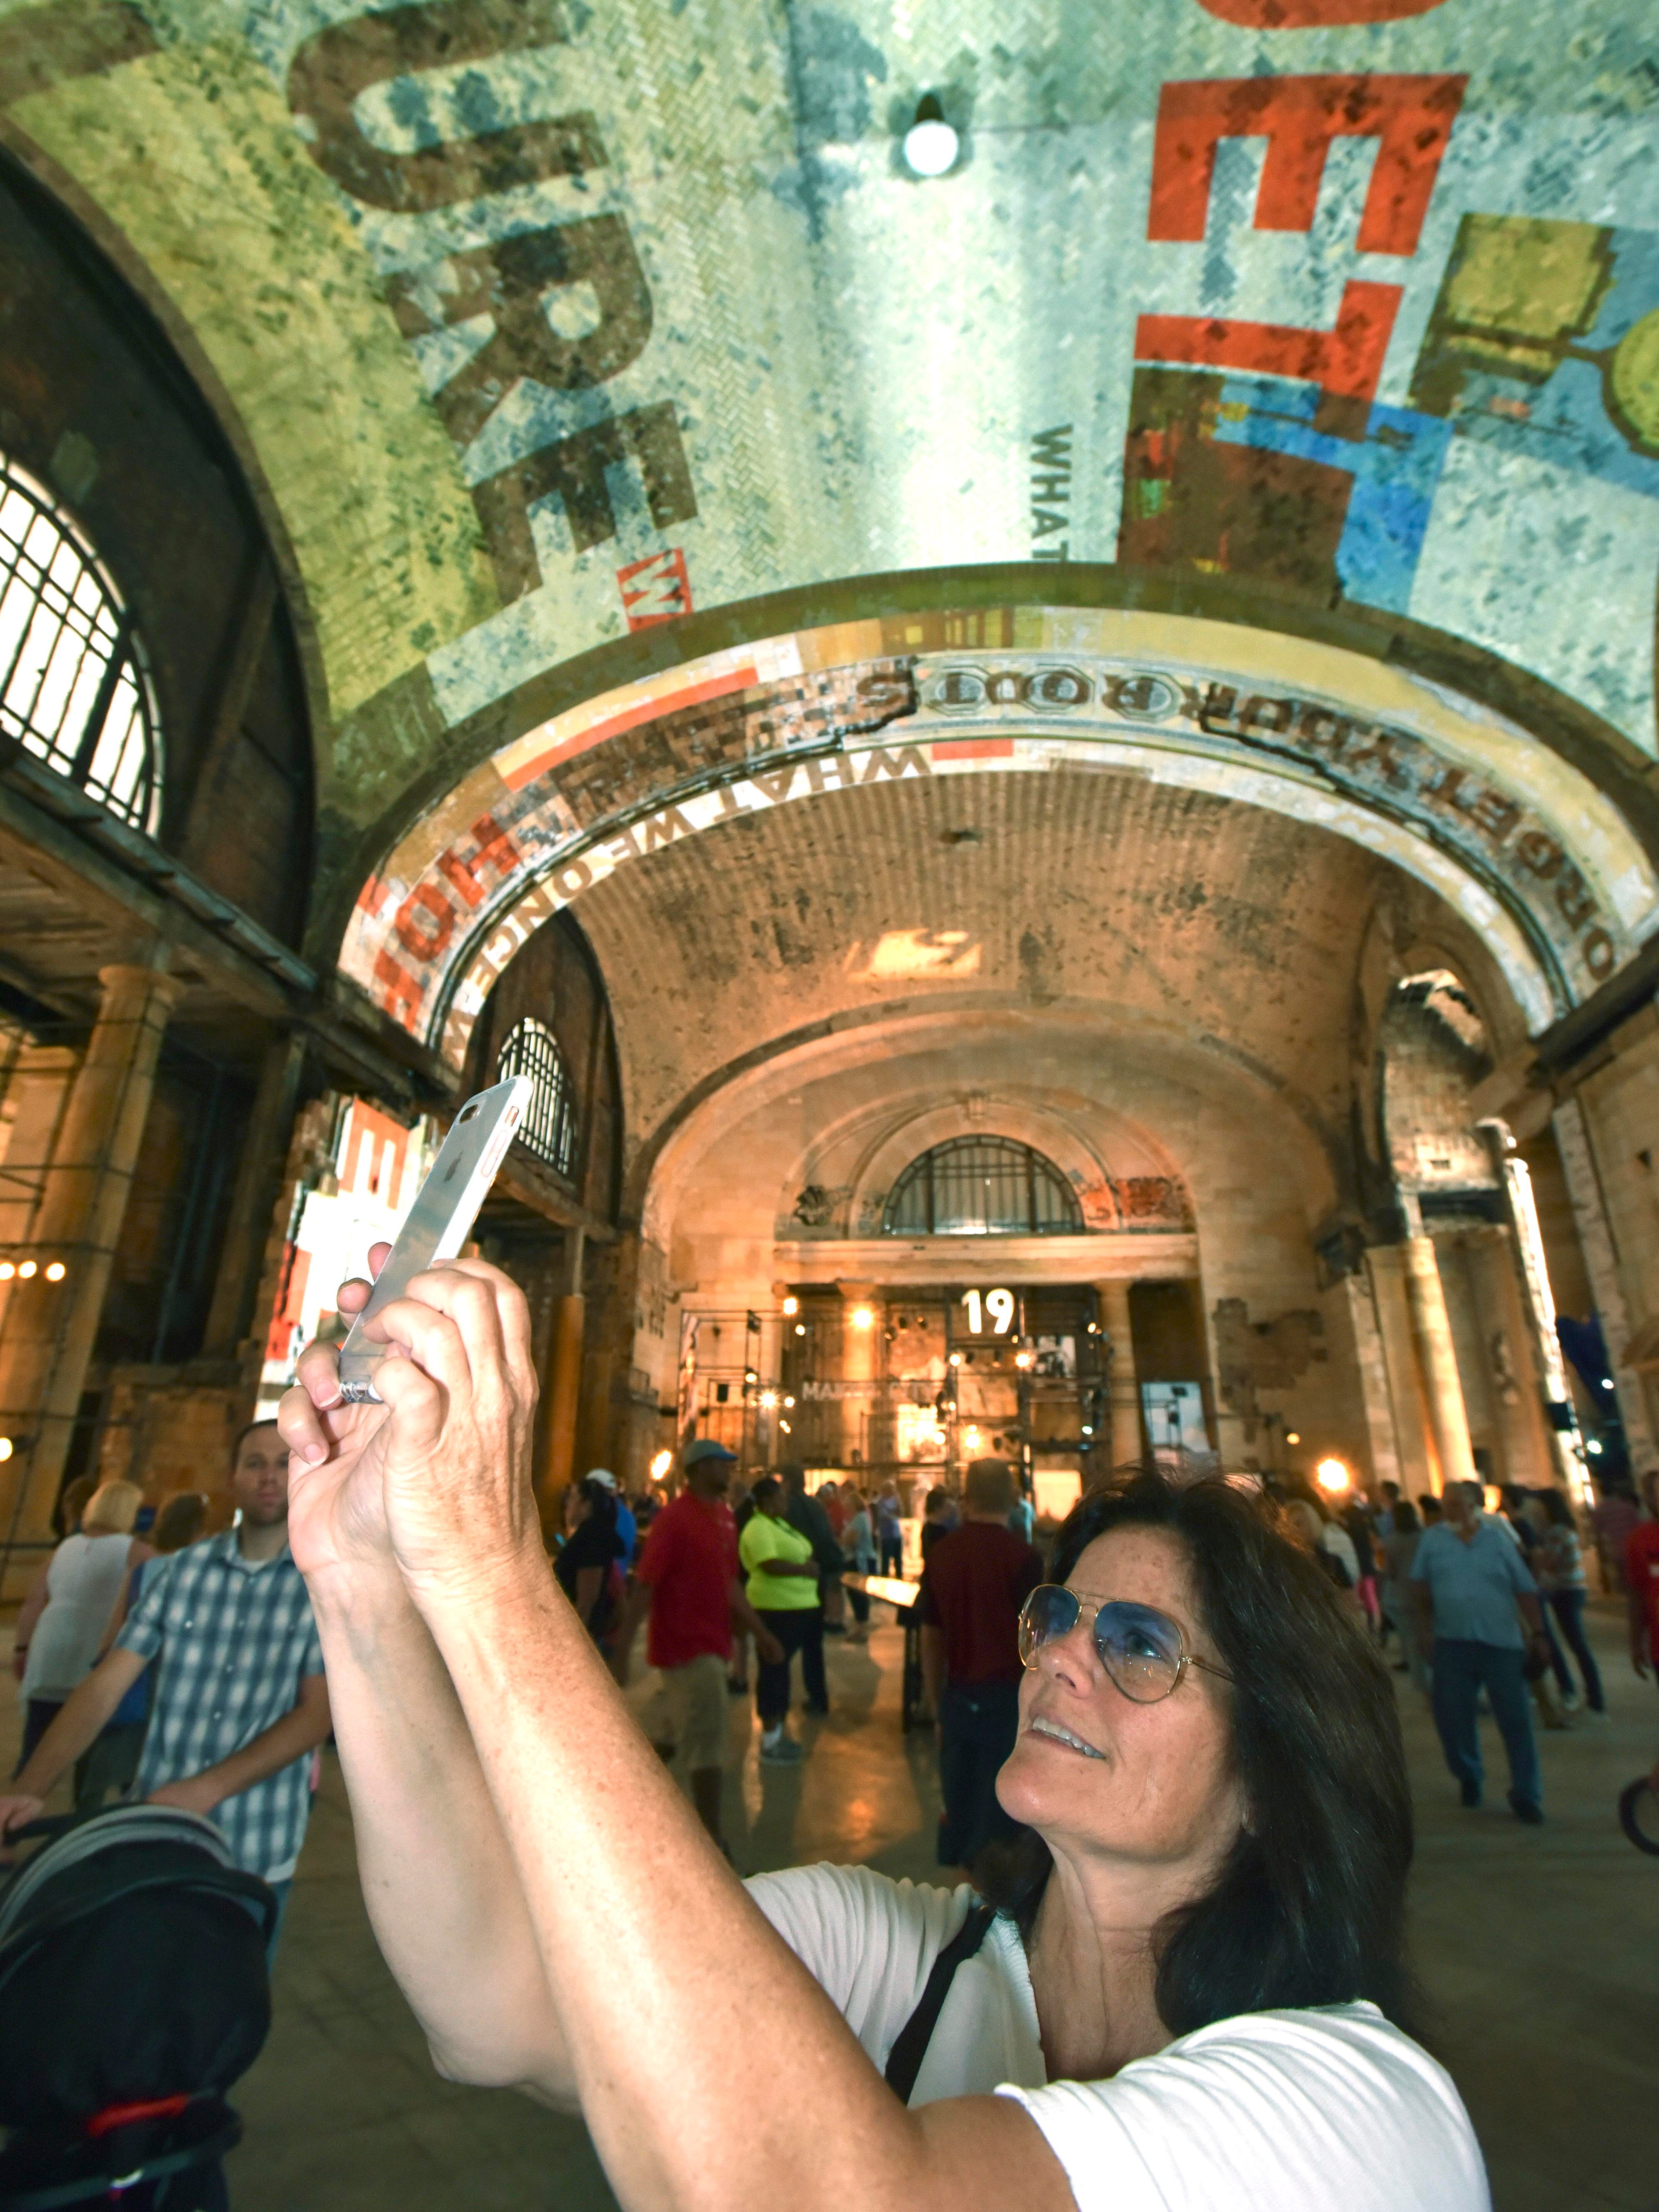 Jane Lehman, of Grosse Pointe, takes pictures of the ceiling in the lobby of the train station.